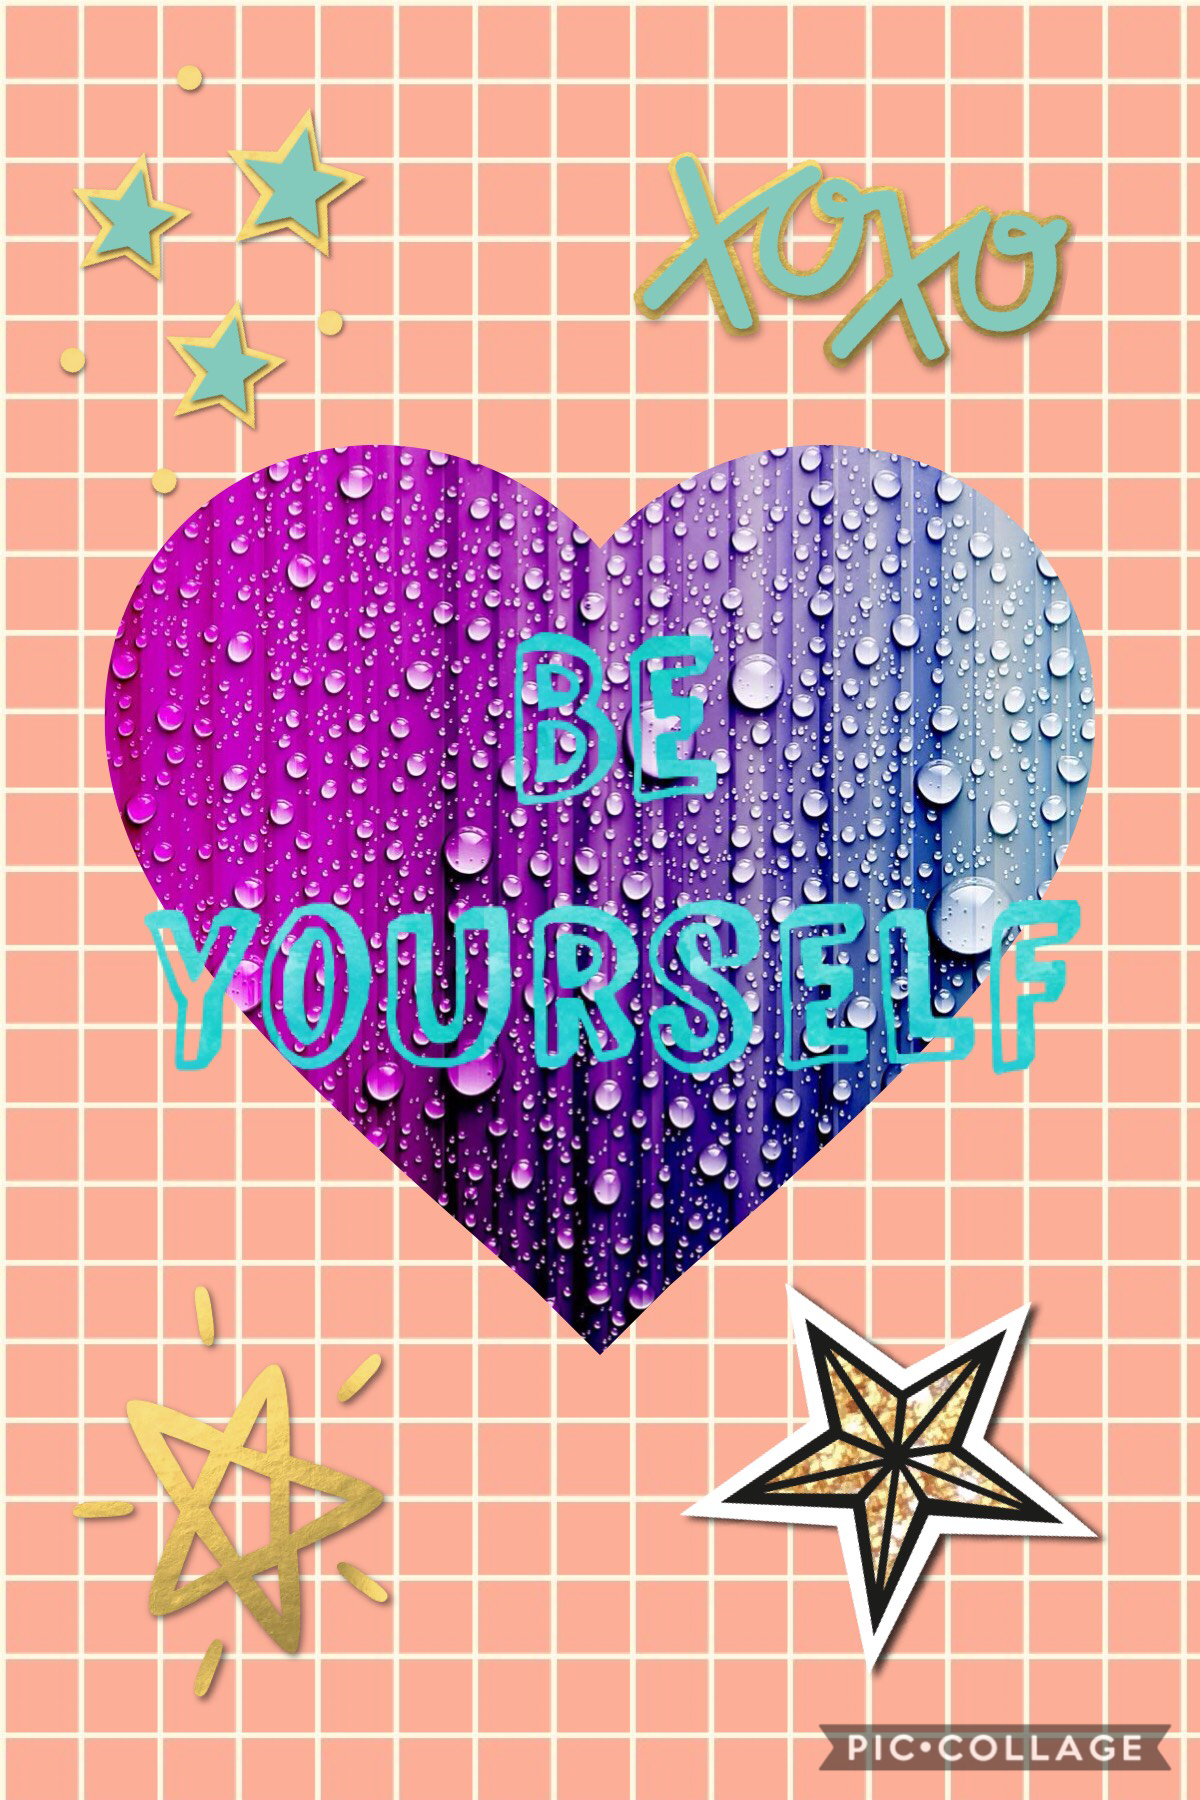 Be yourself everyone else is taken my fav quote!!!😍😍